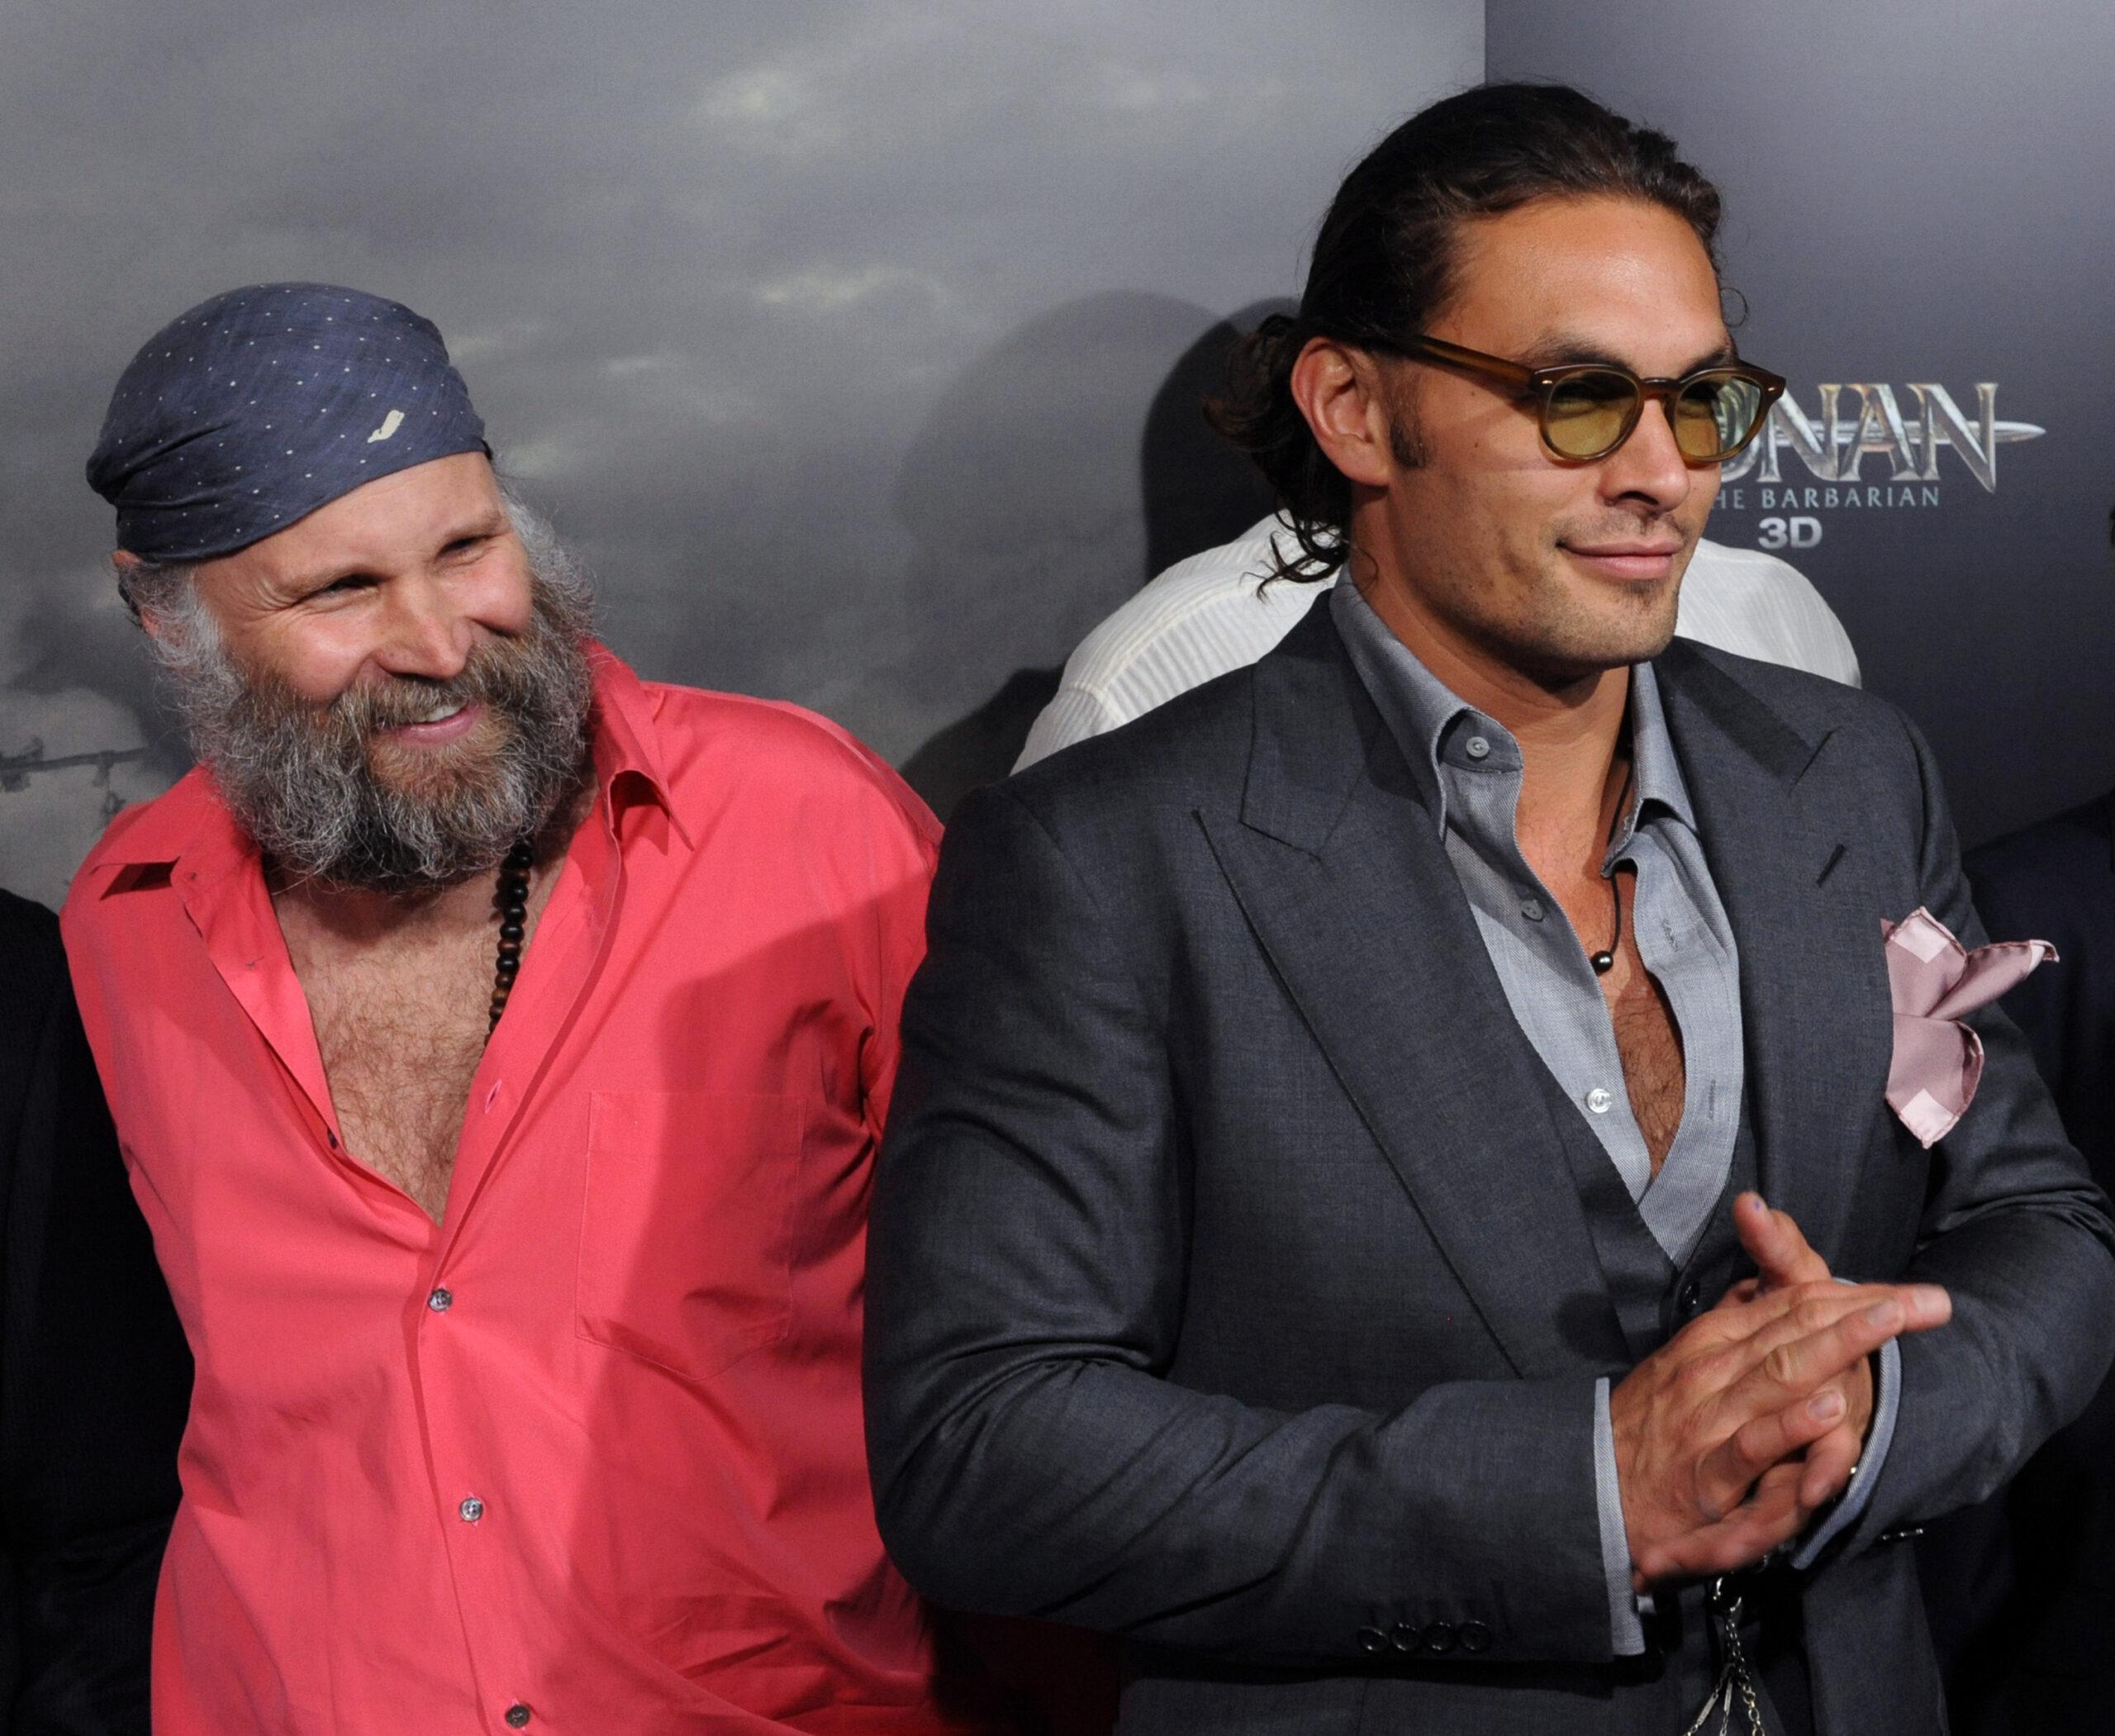 Marcus Nispel and Jason Momoa attend the premiere of "Conan the Barbarian" in Los Angeles